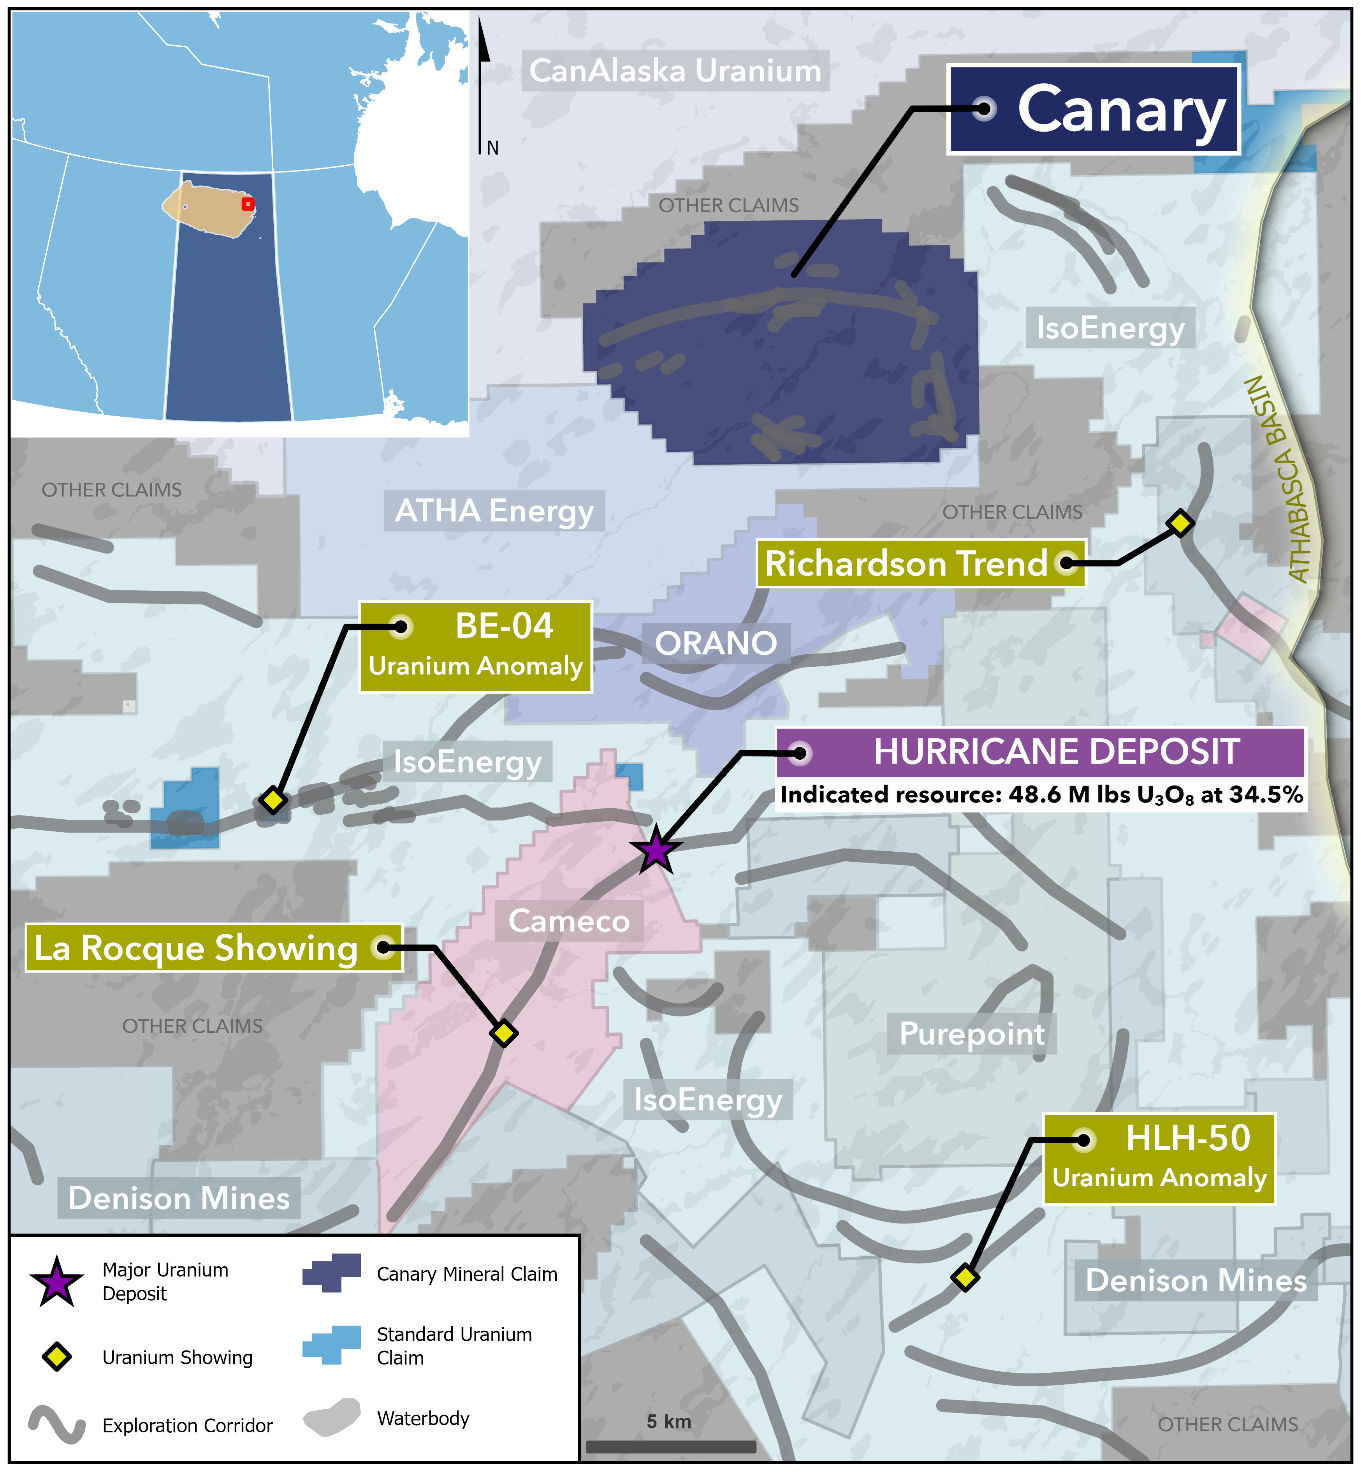 Overview of northeastern Athabasca Basin region, highlighting the Canary Project. Hurricane Deposit Indicated Resource from IsoEnergy Ltd. Technical Report on the Larocque East Project, Northern Saskatchewan, Canada. Dates July 8, 2022.